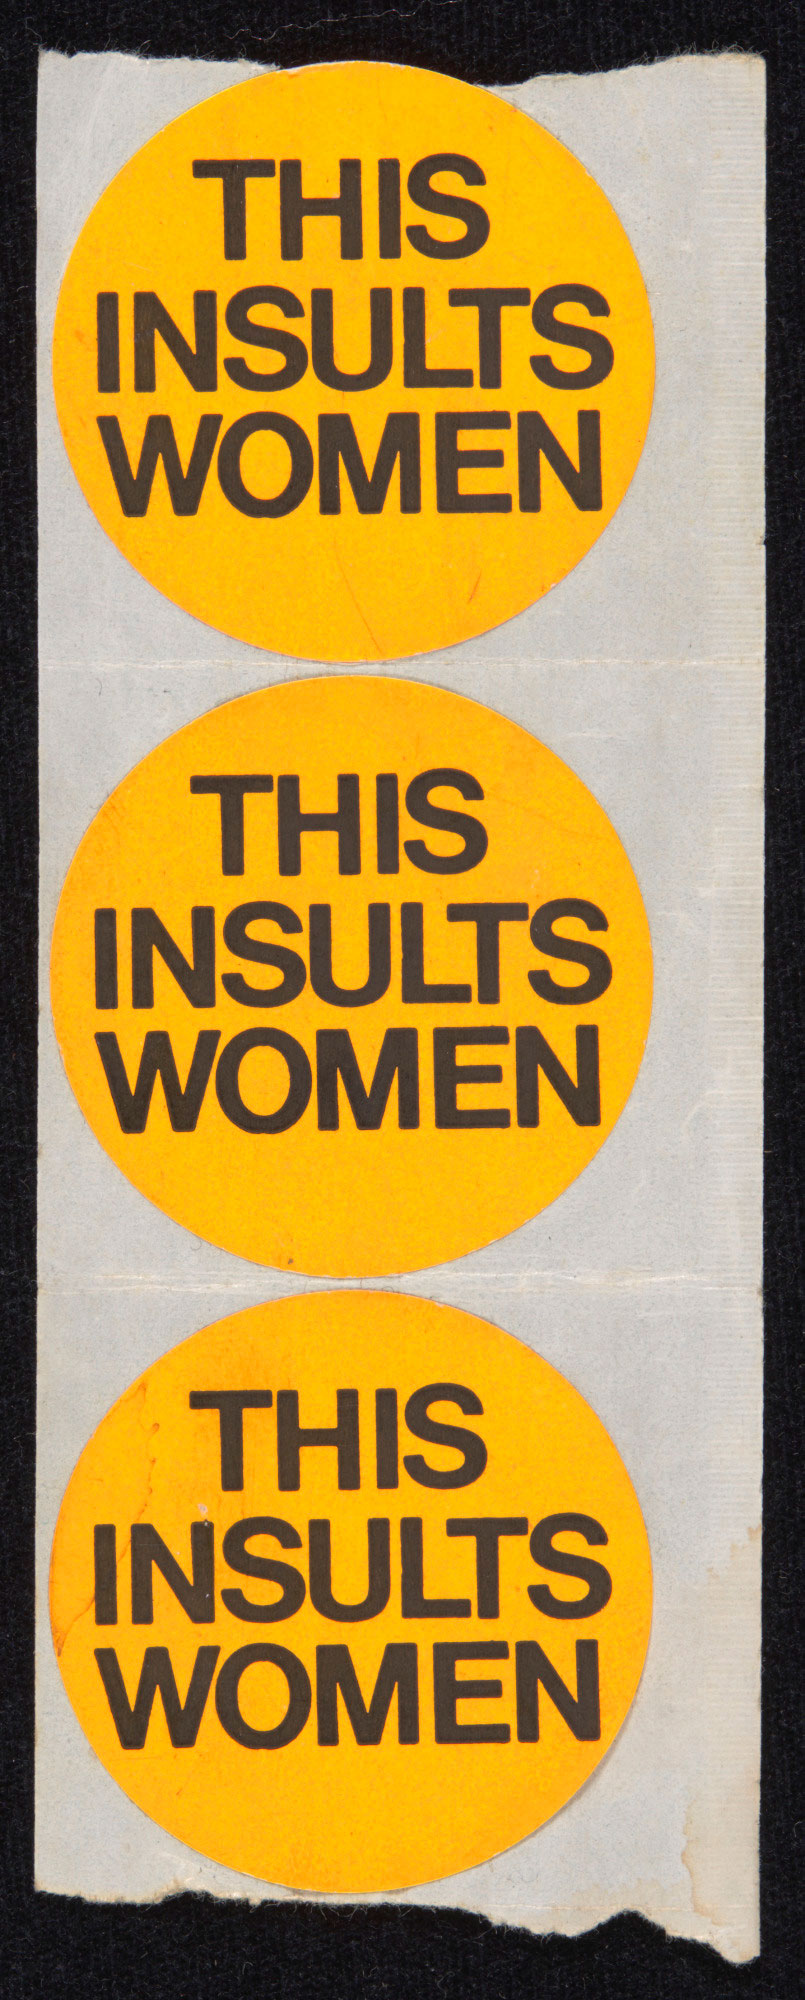 This insults women’ stickers.